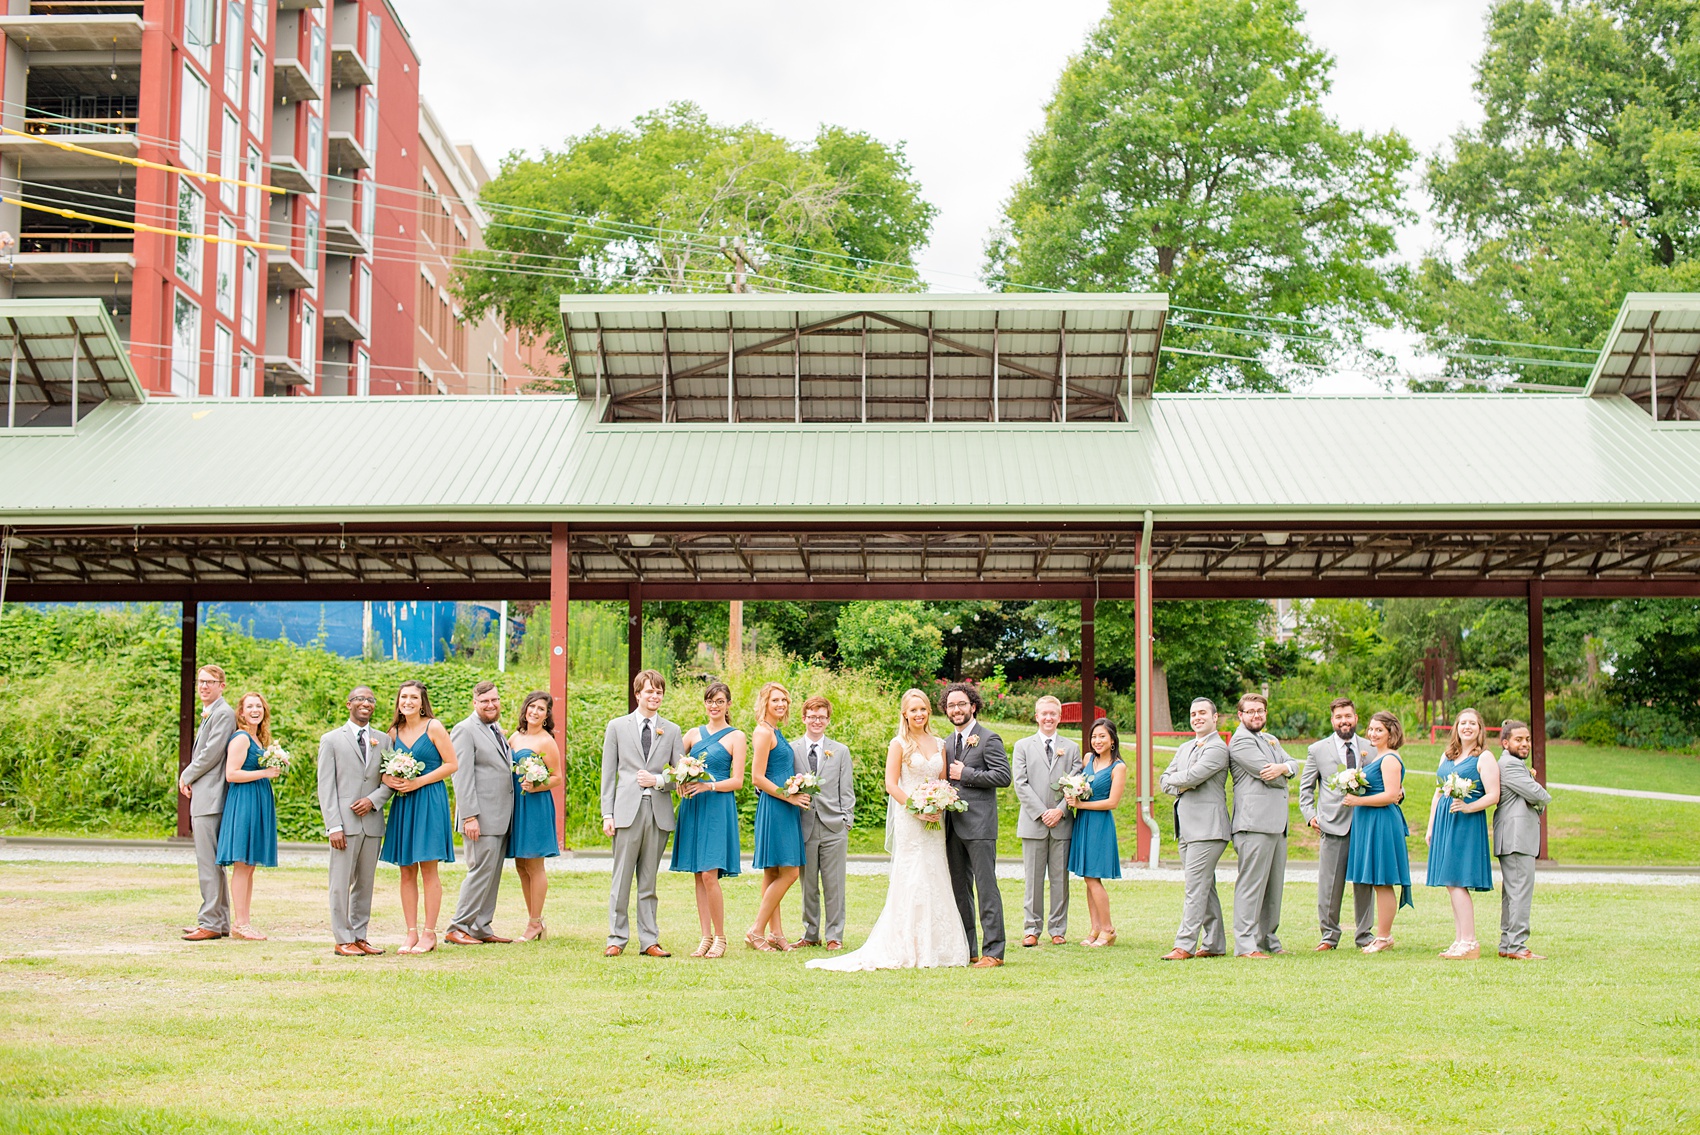 Mikkel Paige Photography photos from a wedding in Durham, North Carolina. Picture of the large wedding party - with the bridesmaids in teal and groomsmen in grey - in a Vogue-like photo in the park.